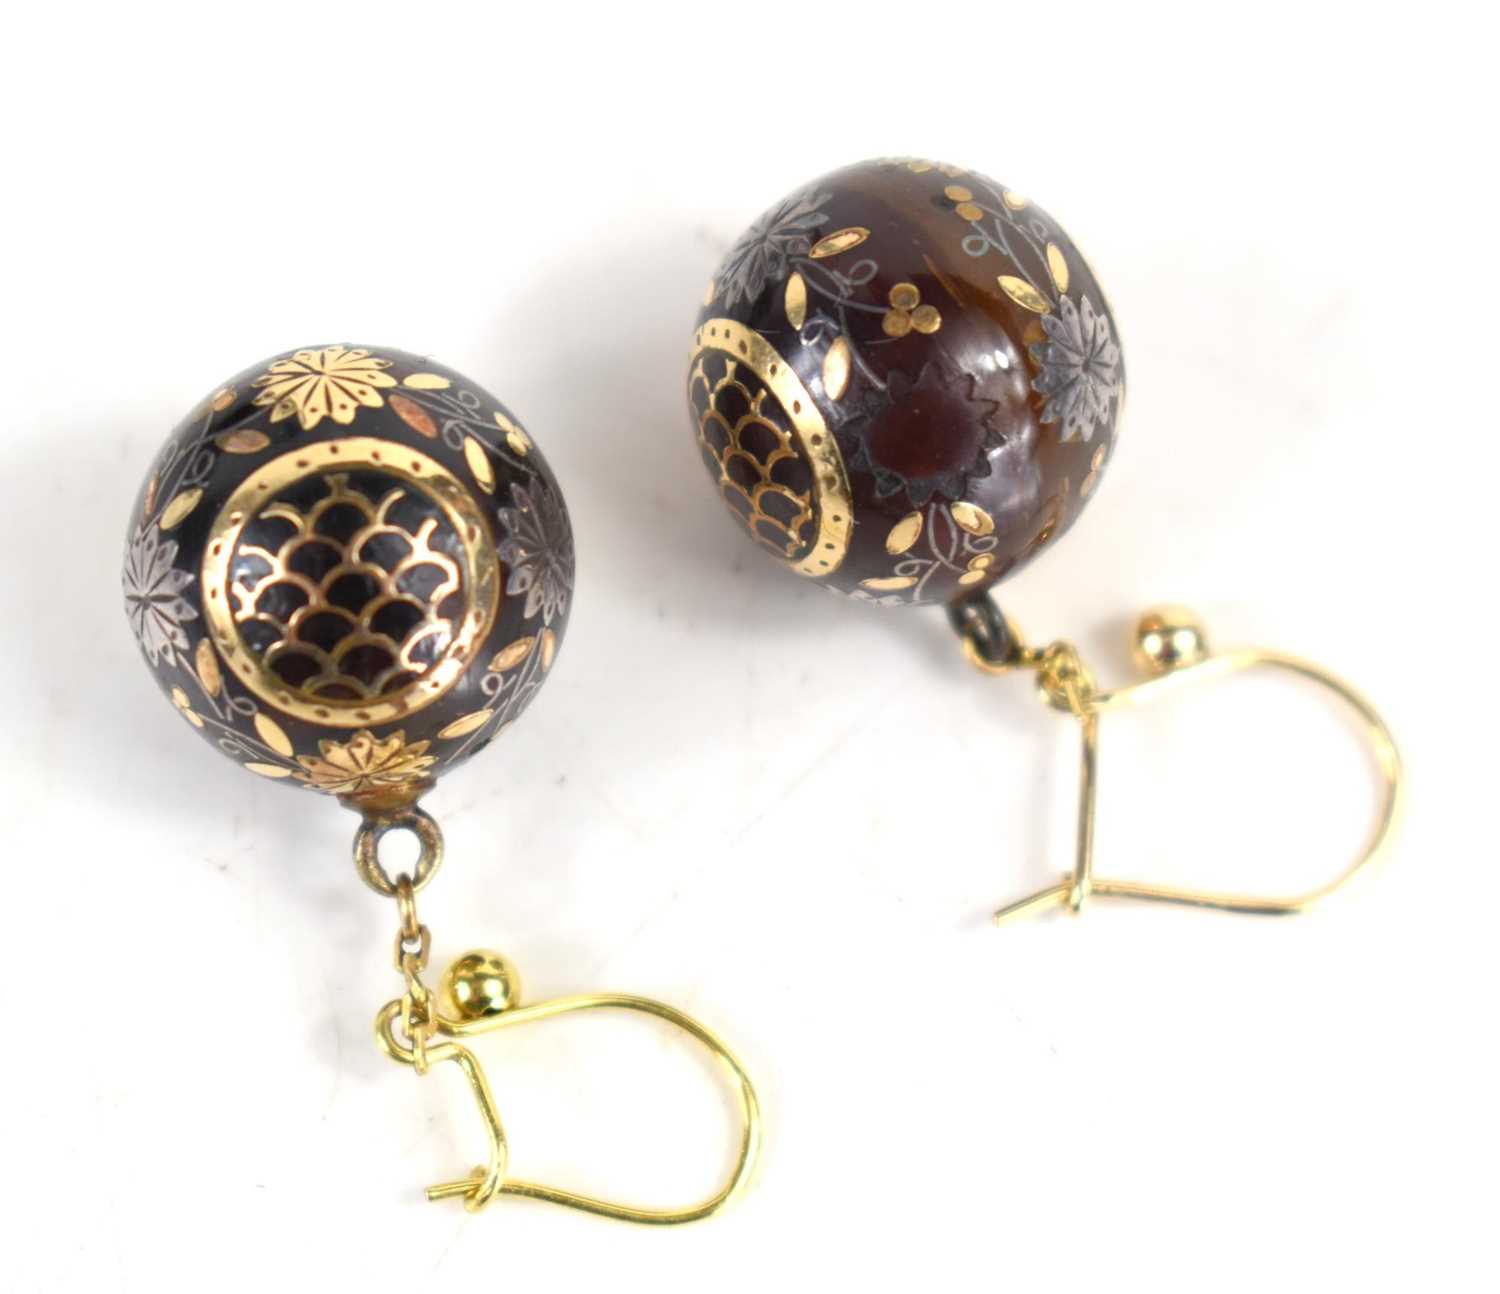 A pair of early 19th century gold ball earrings, the ball drops inlaid with gold flowers, and fish - Image 2 of 2